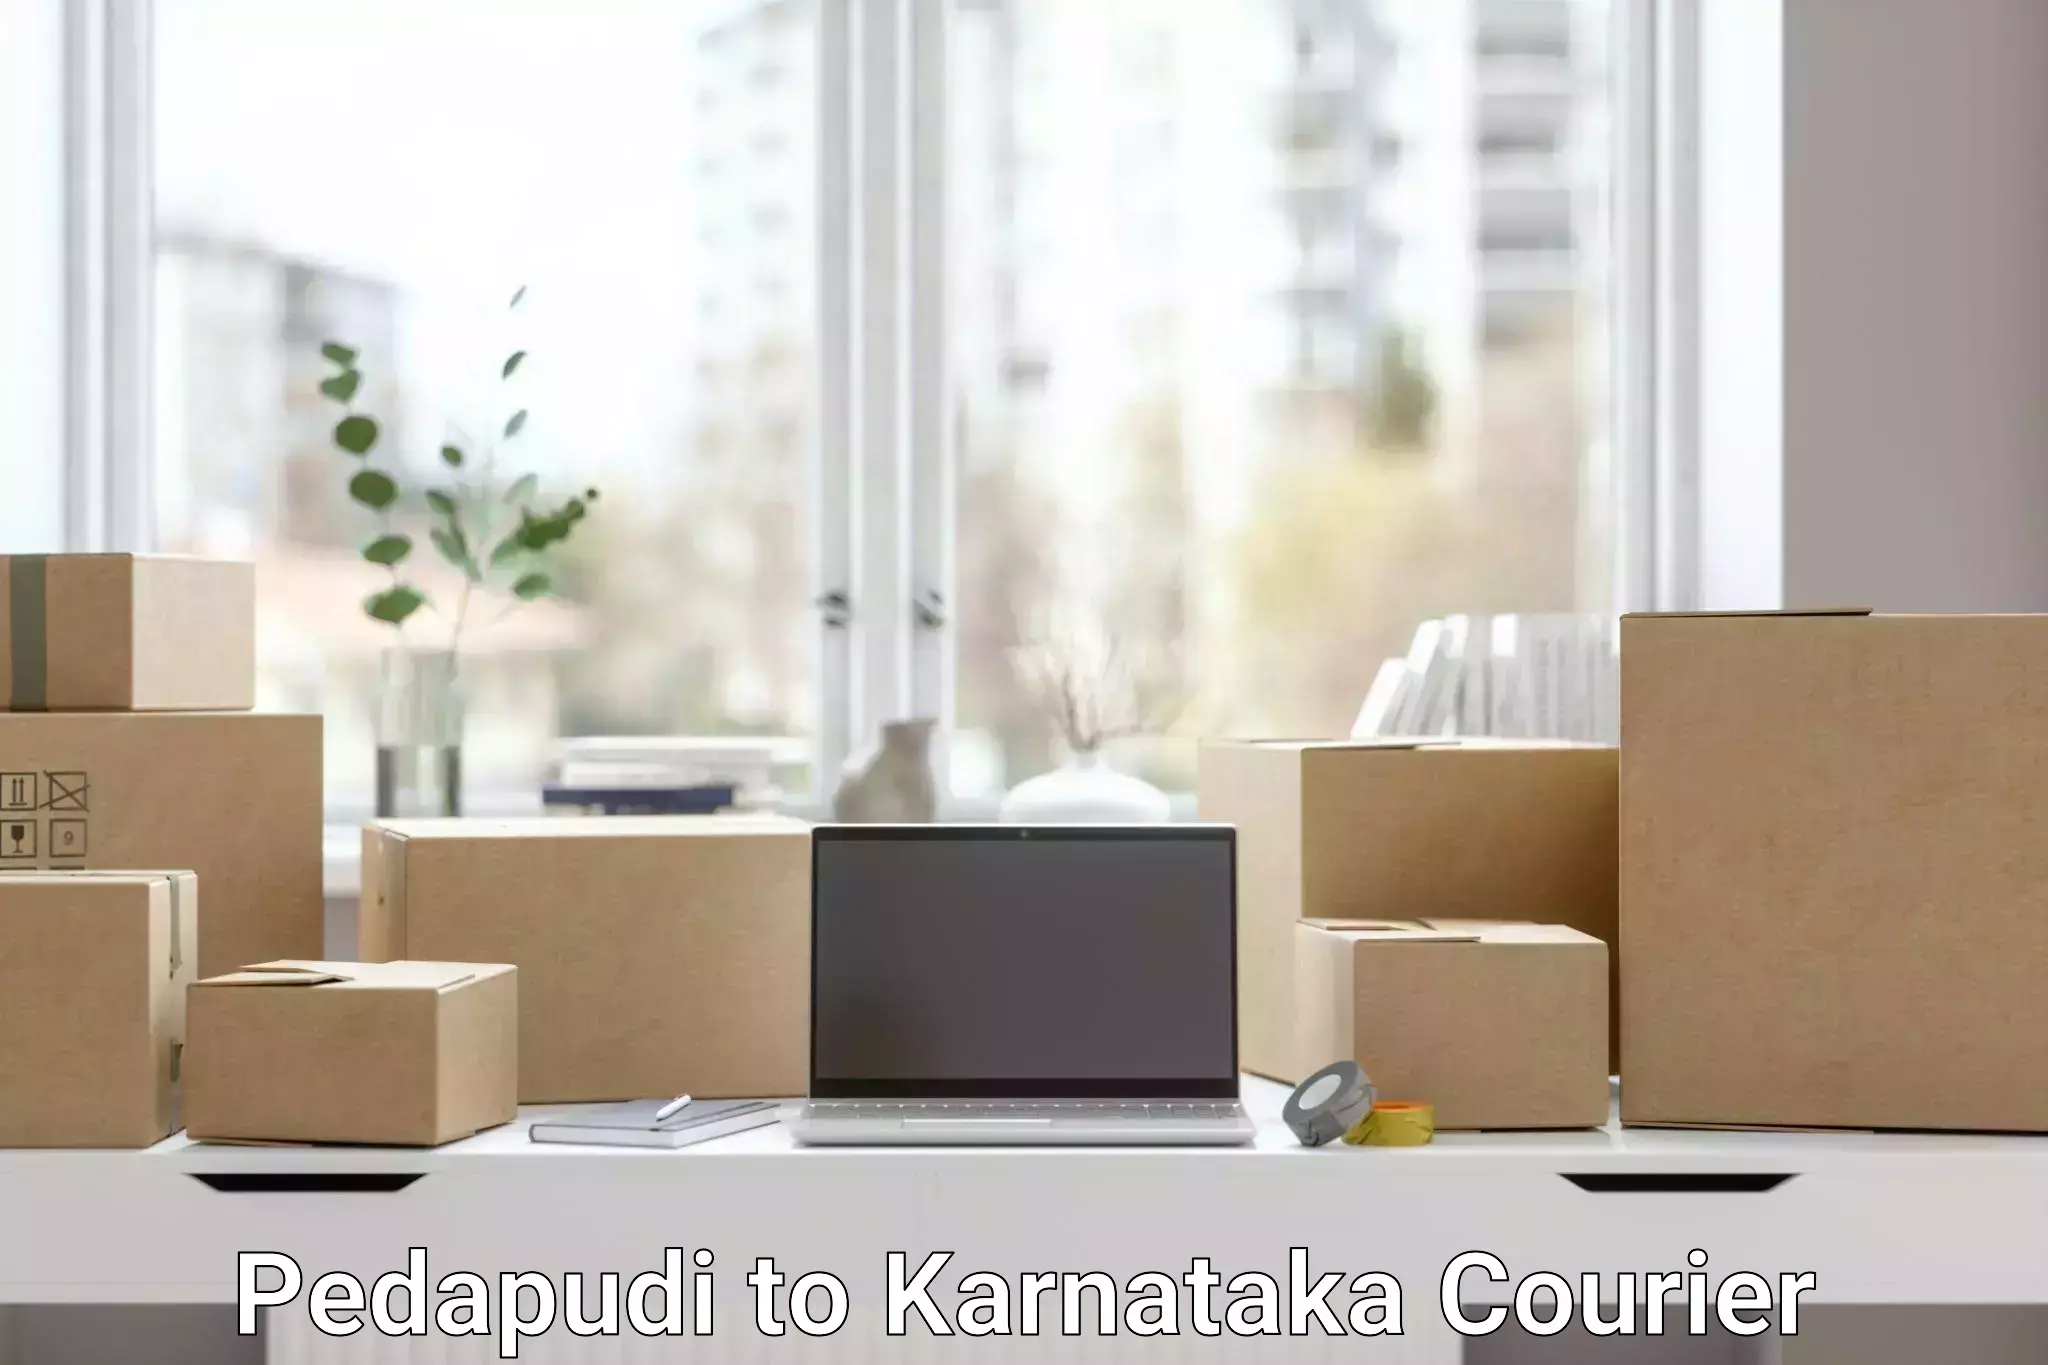 Enhanced tracking features in Pedapudi to Chikodi